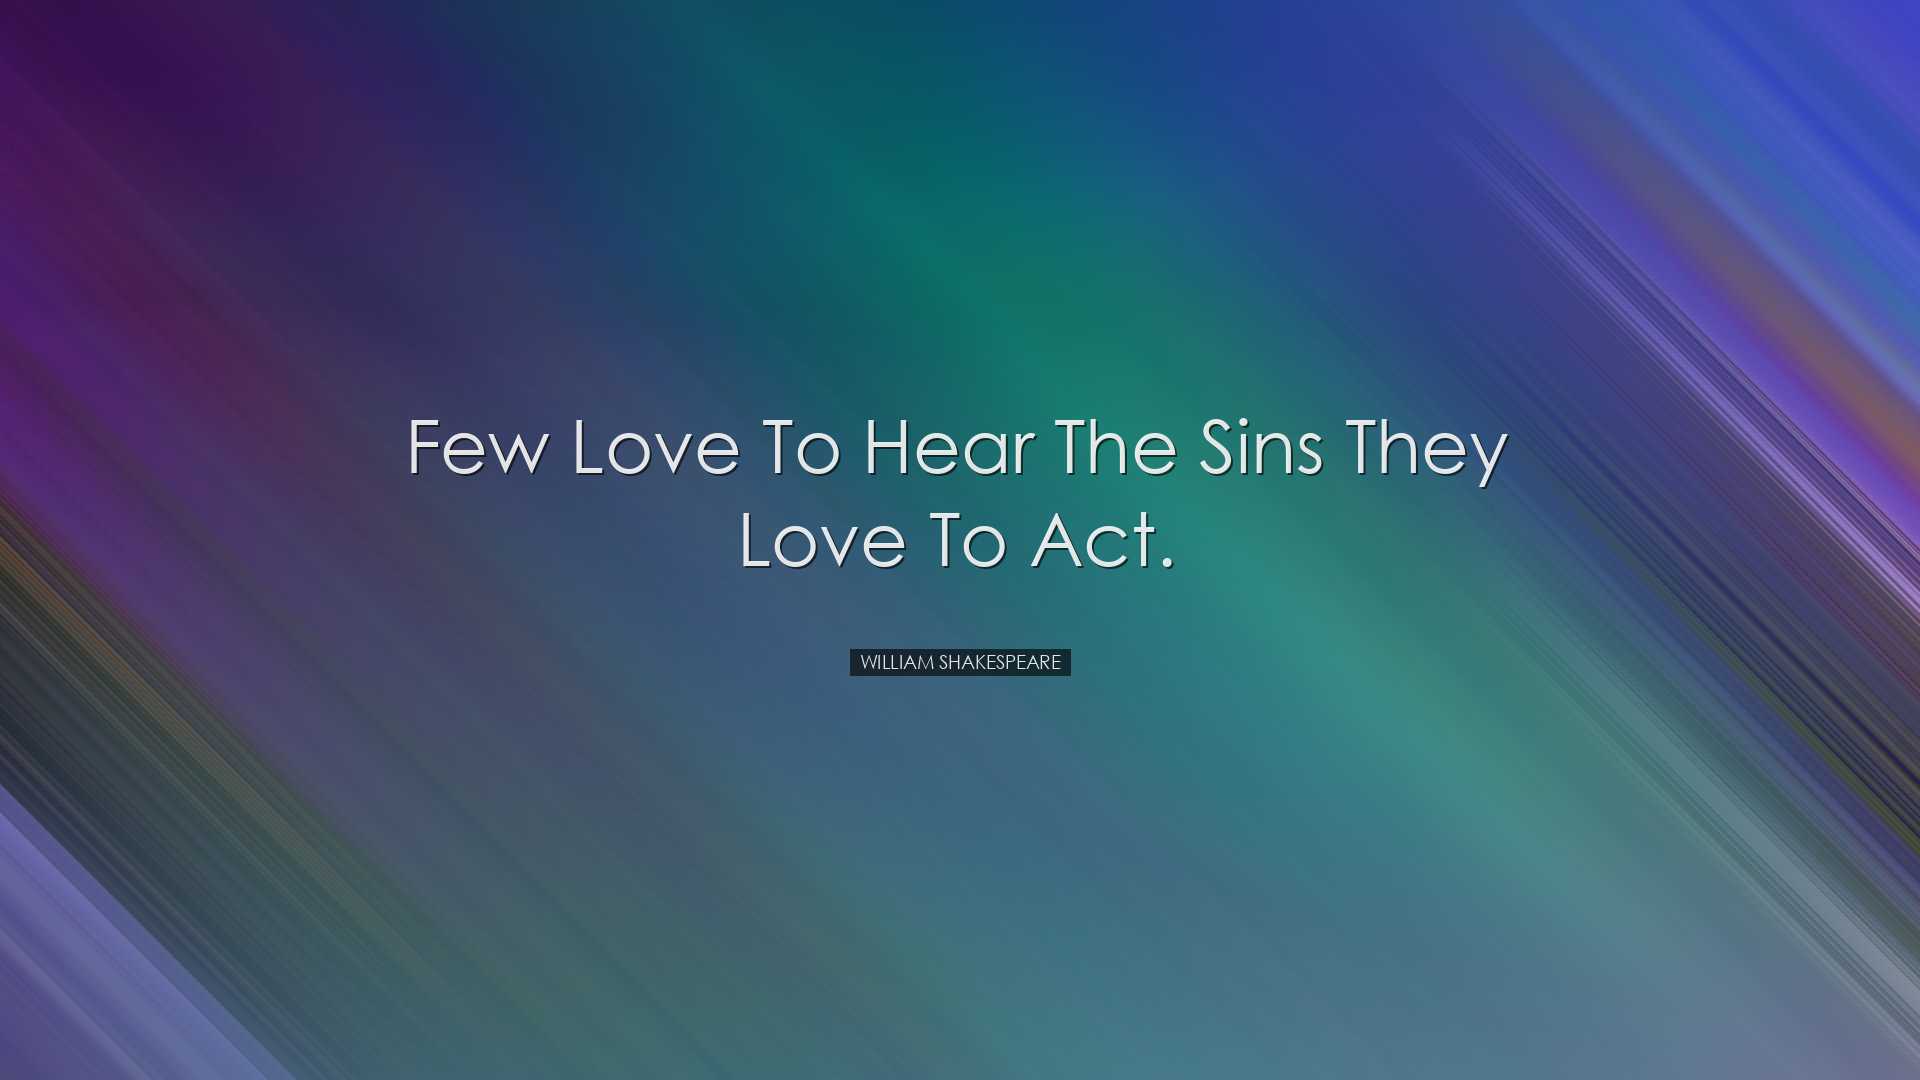 Few love to hear the sins they love to act. - William Shakespeare